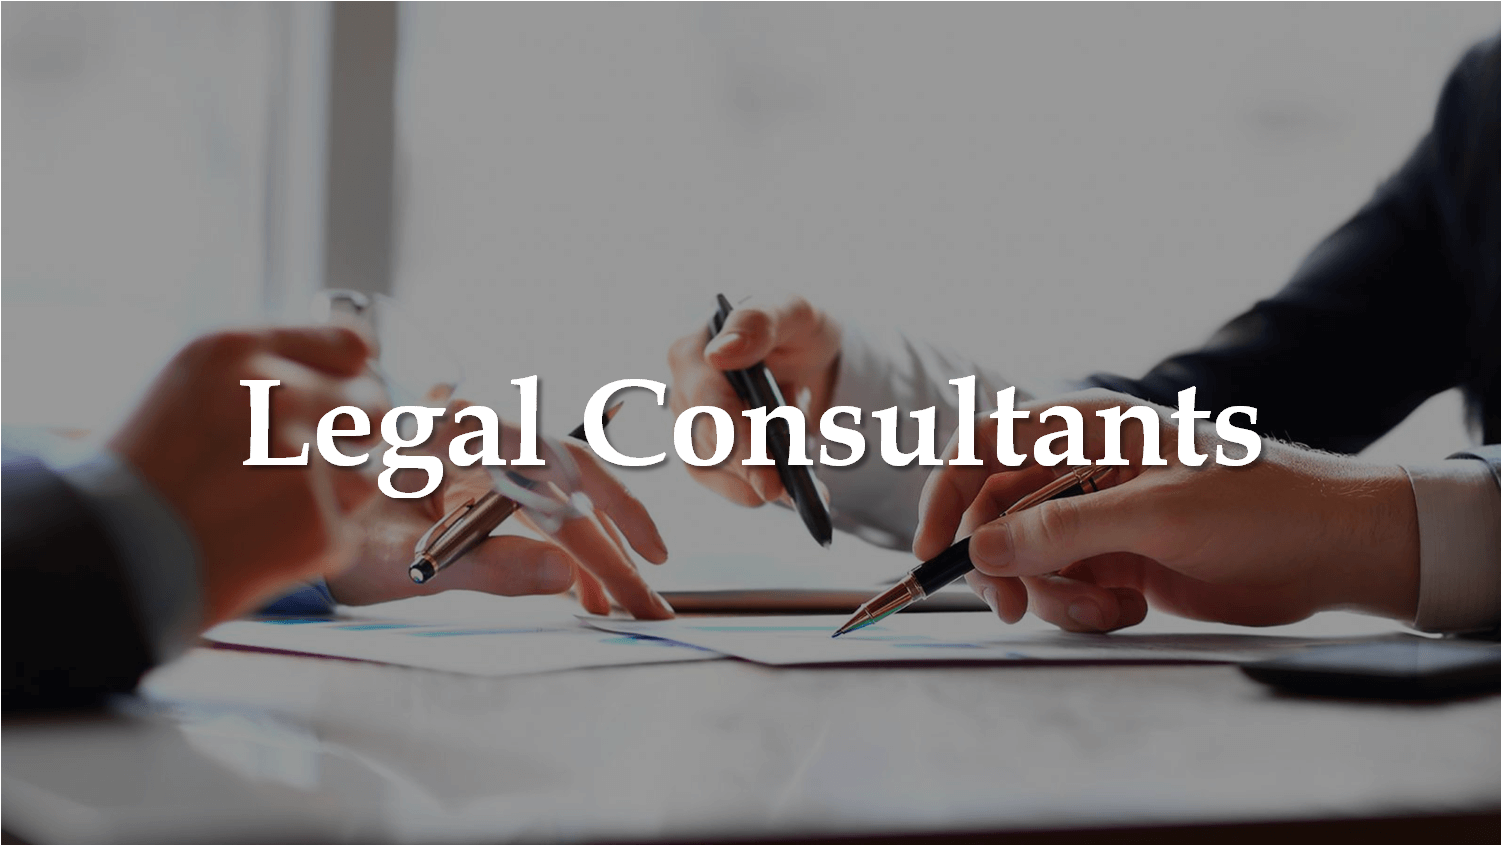 Reasons to Hire the Best Law Firms - EZ HR Consultants